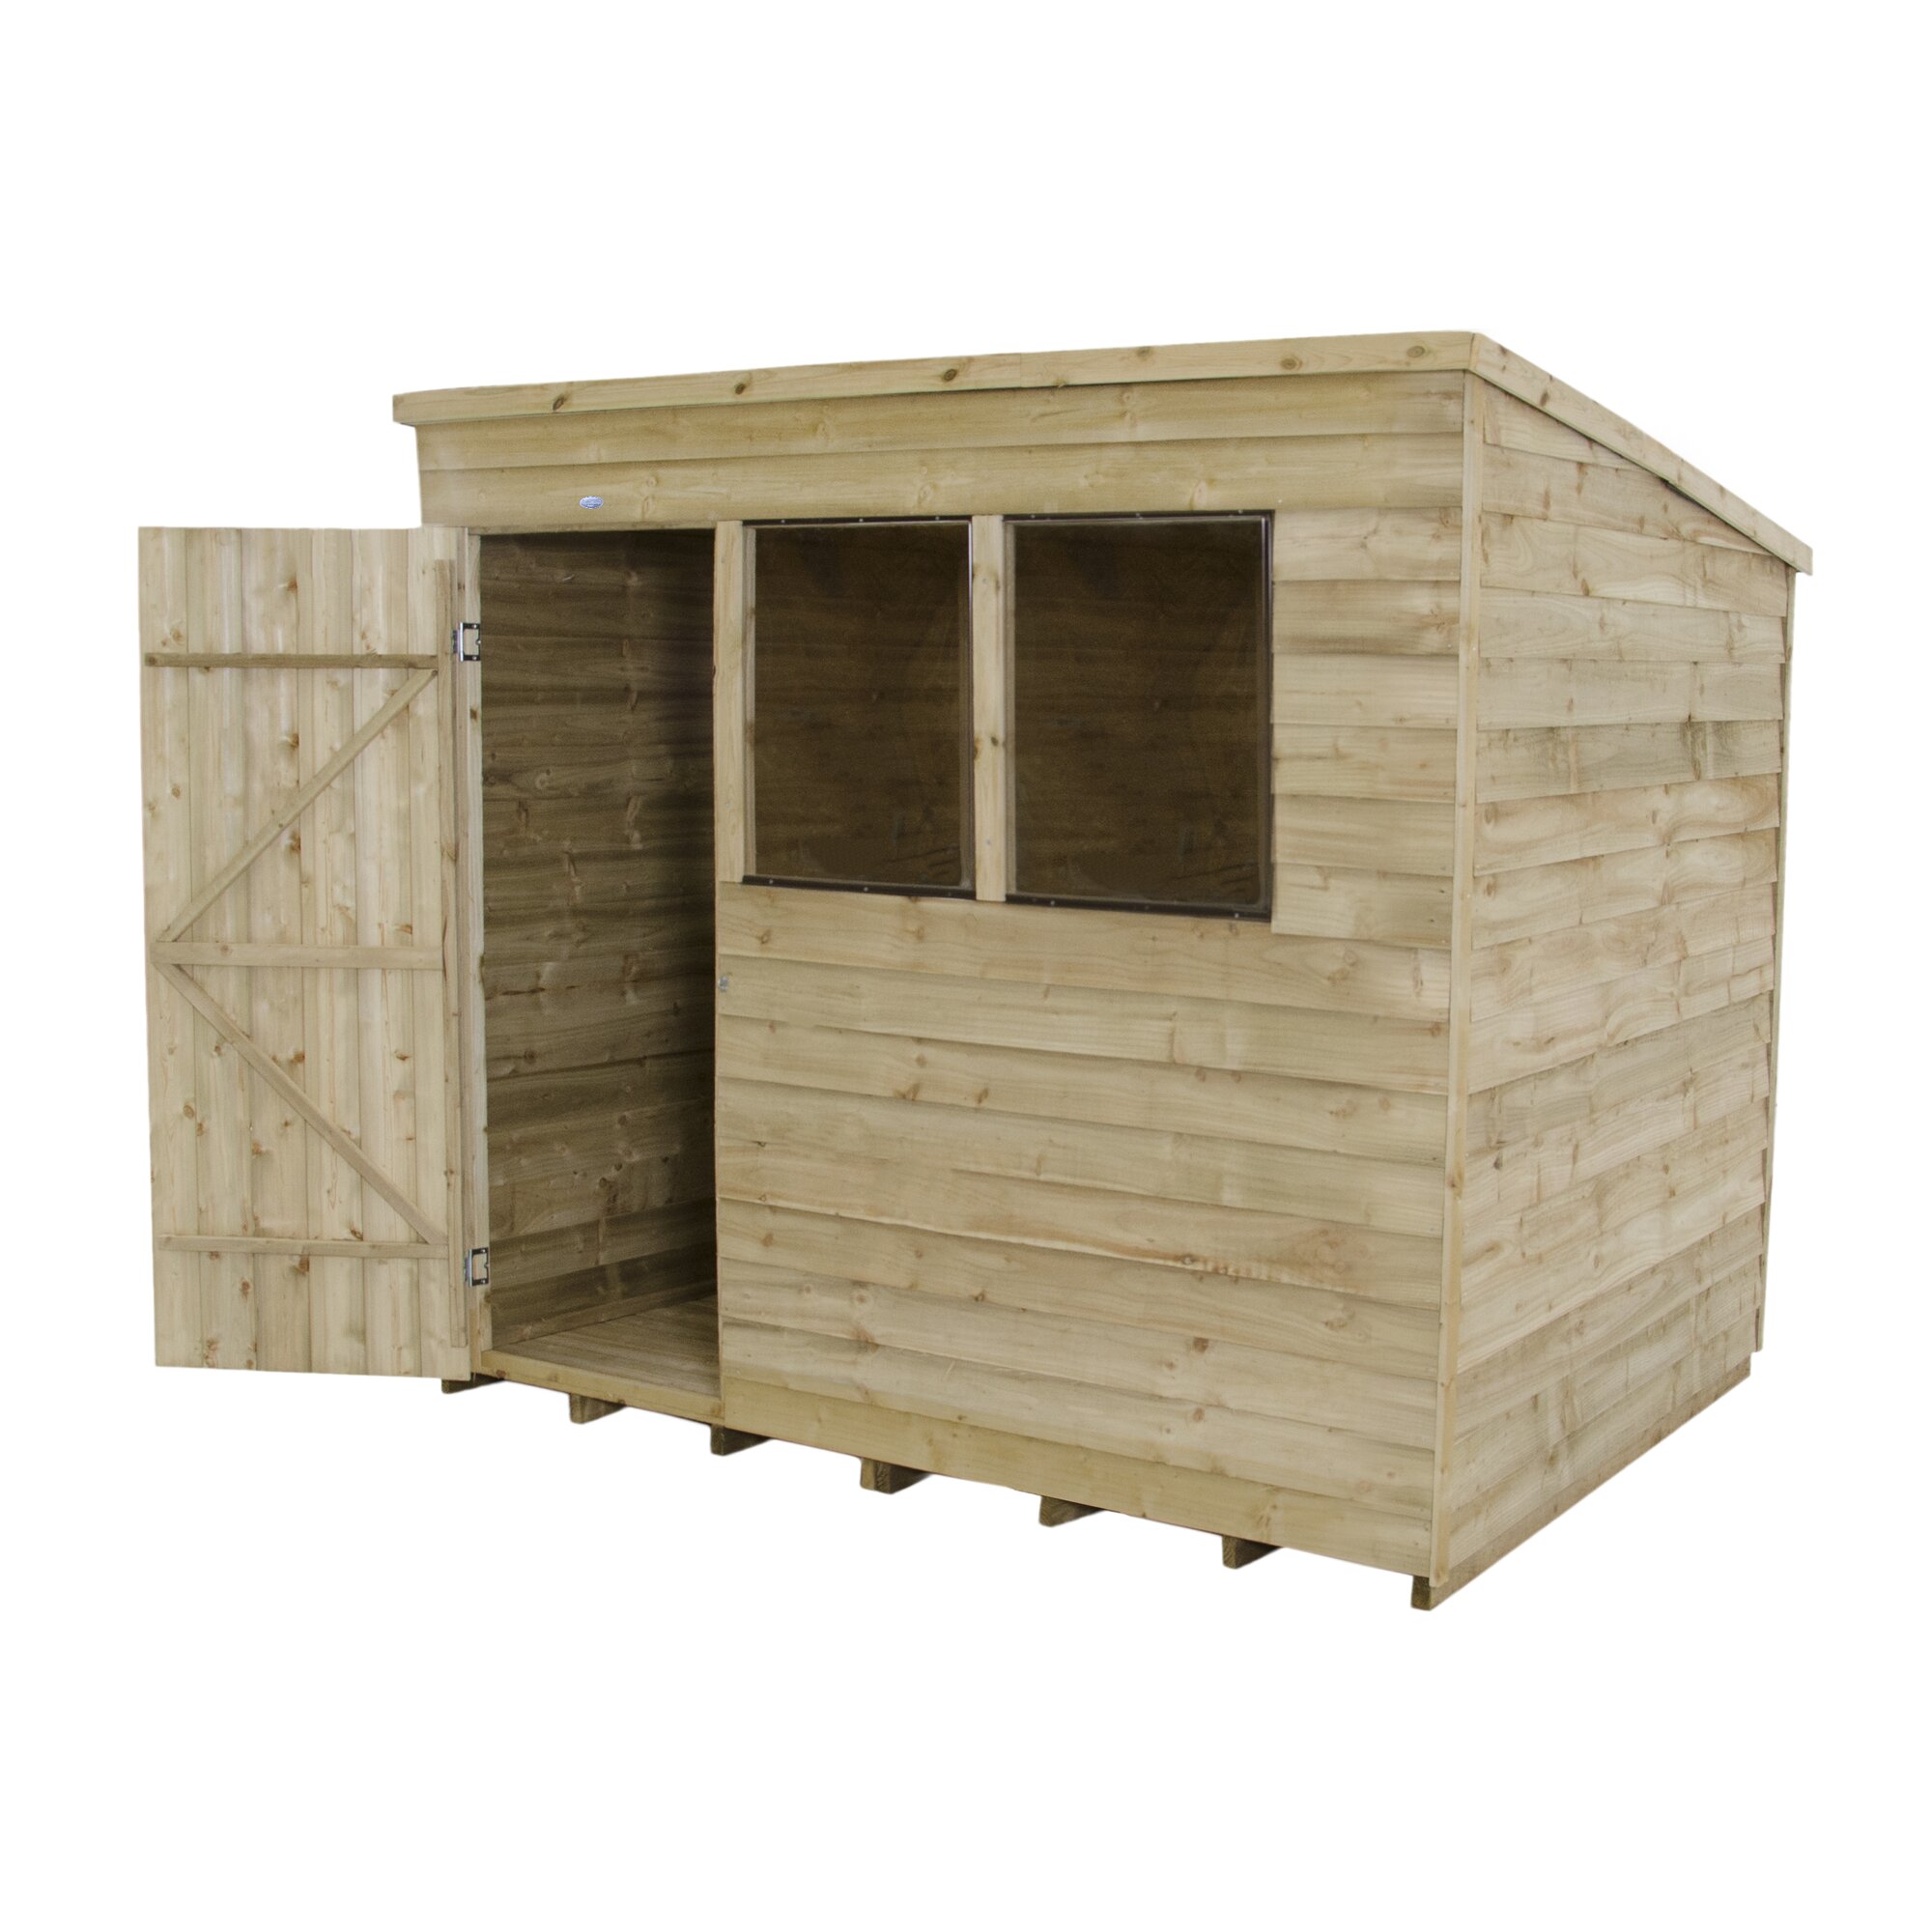 Forest Garden 8 x 6 Wooden Storage Shed &amp; Reviews 